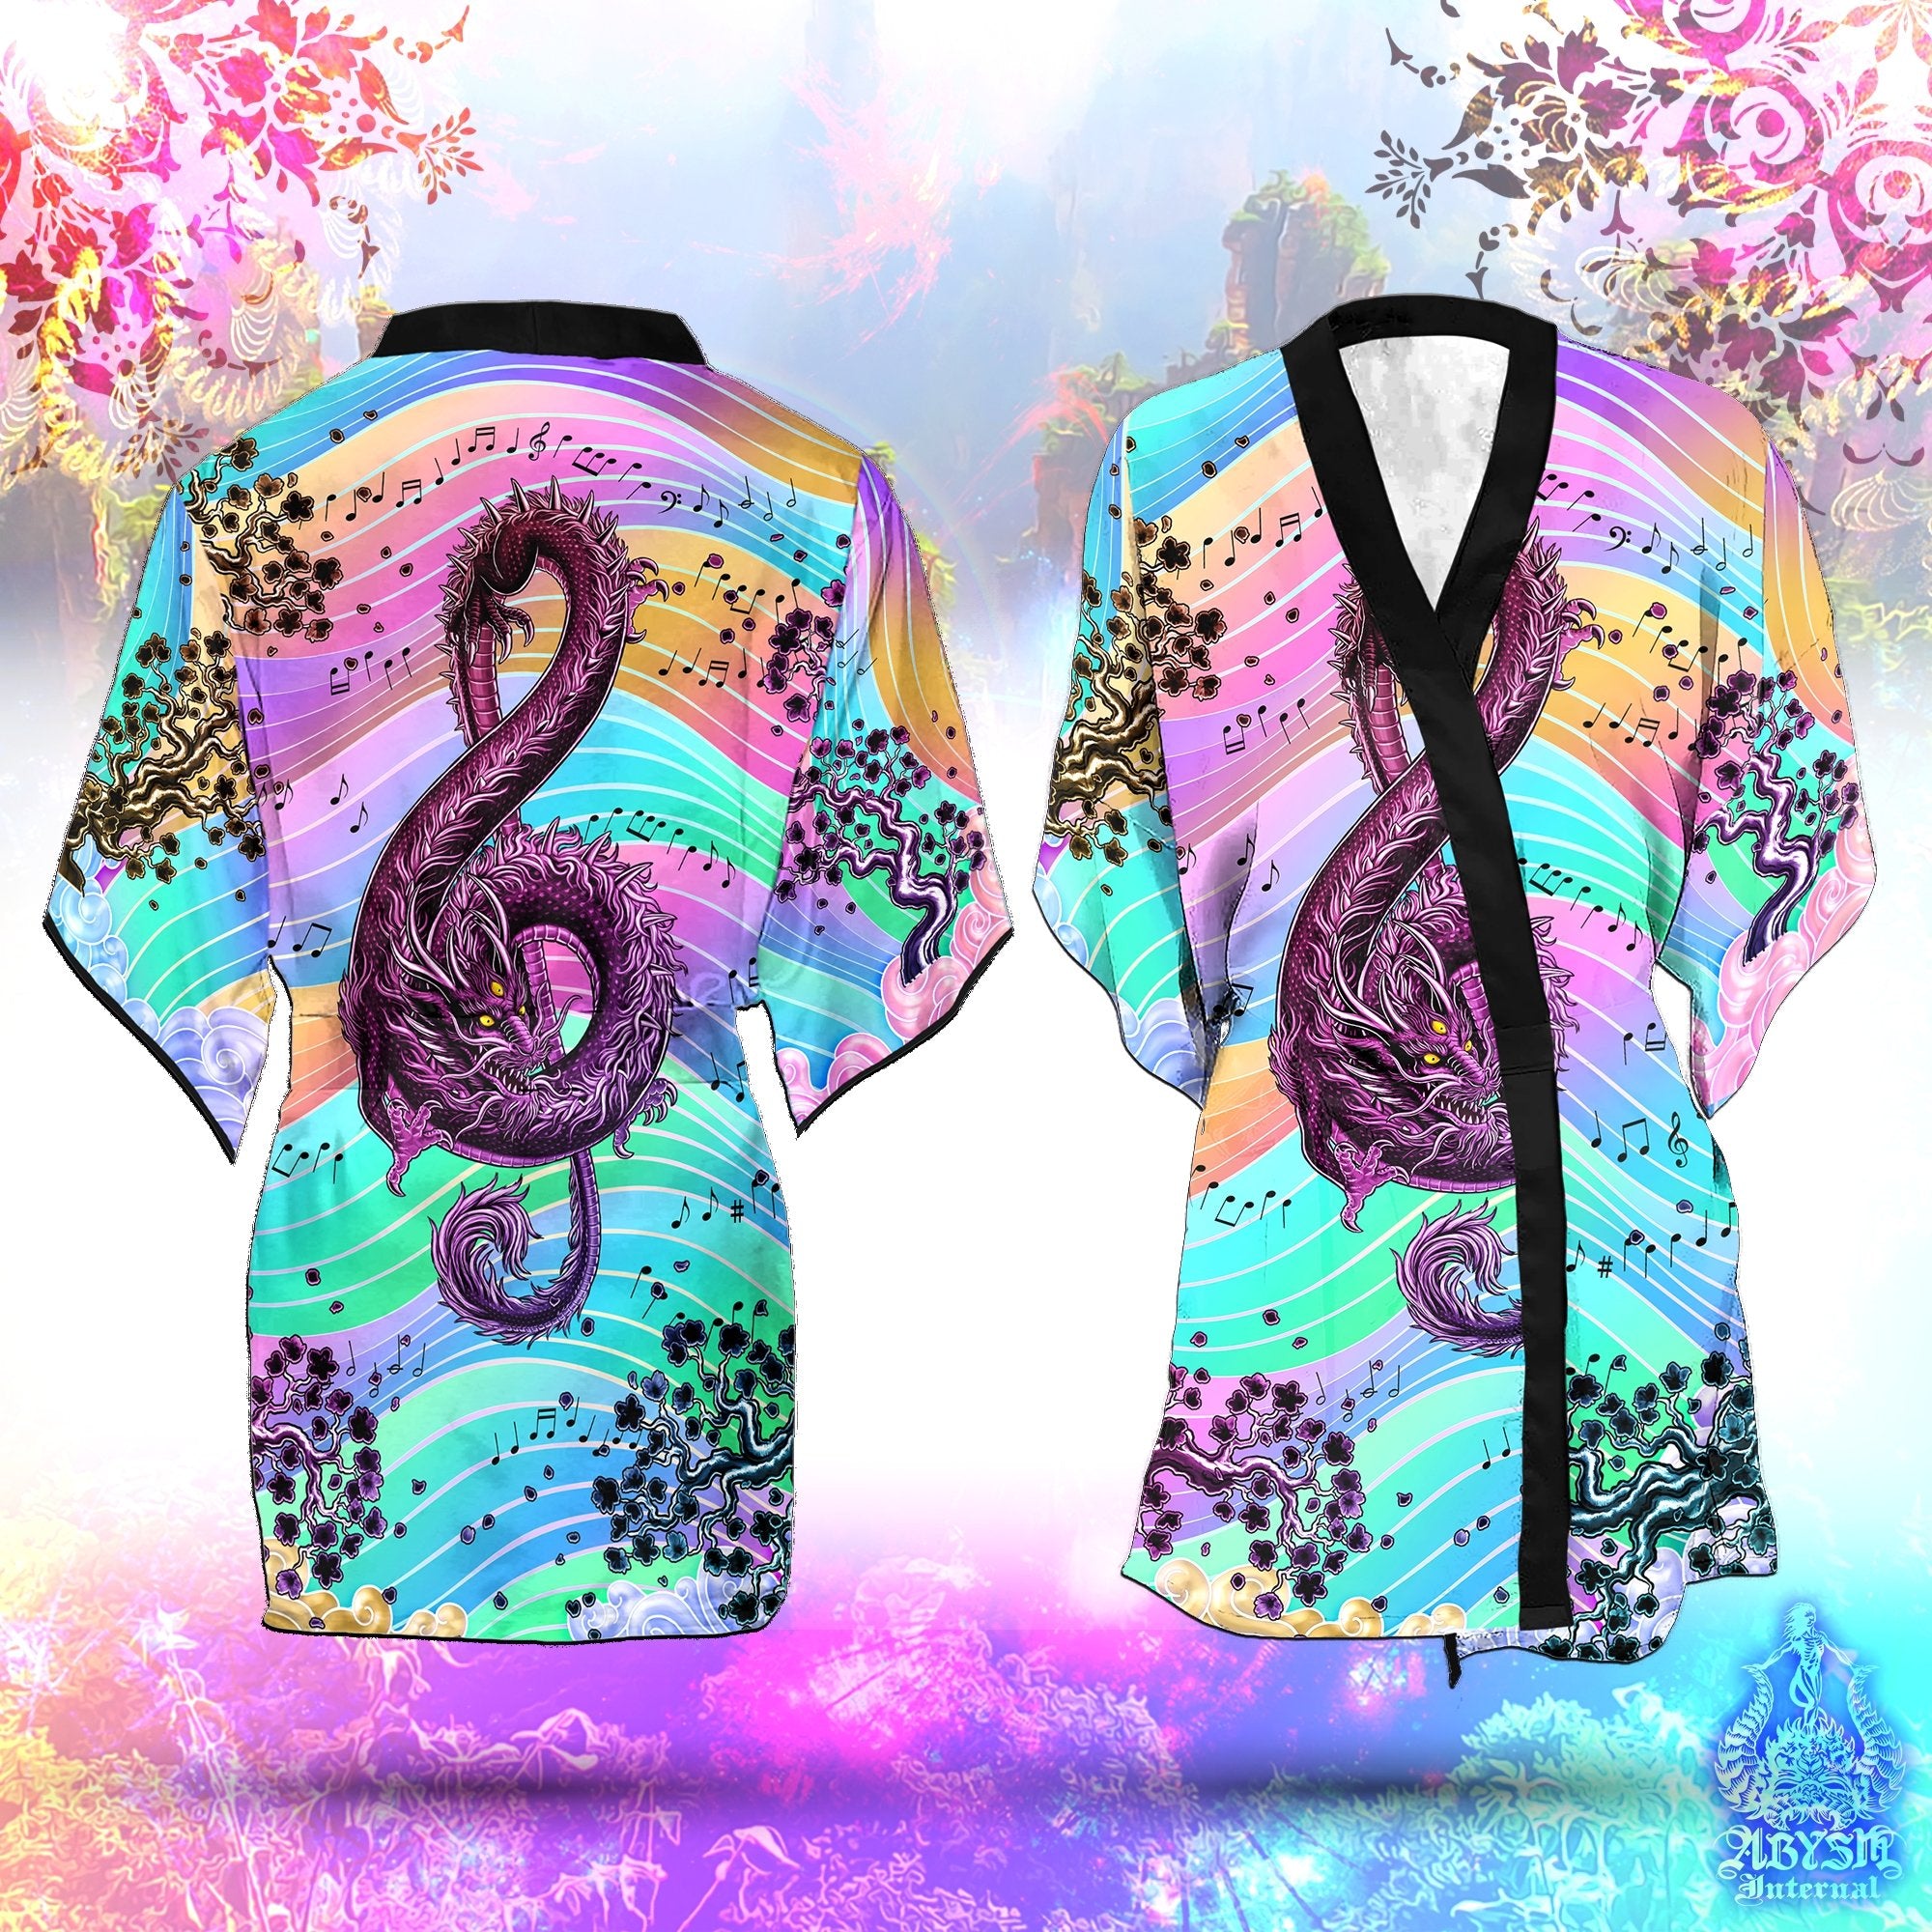 Music Cover Up, Beach Rave Outfit, Party Kimono, Summer Festival Robe, Aesthetic Indie and Alternative Clothing, Unisex - Dragon, Pastel Punk Black I - Abysm Internal